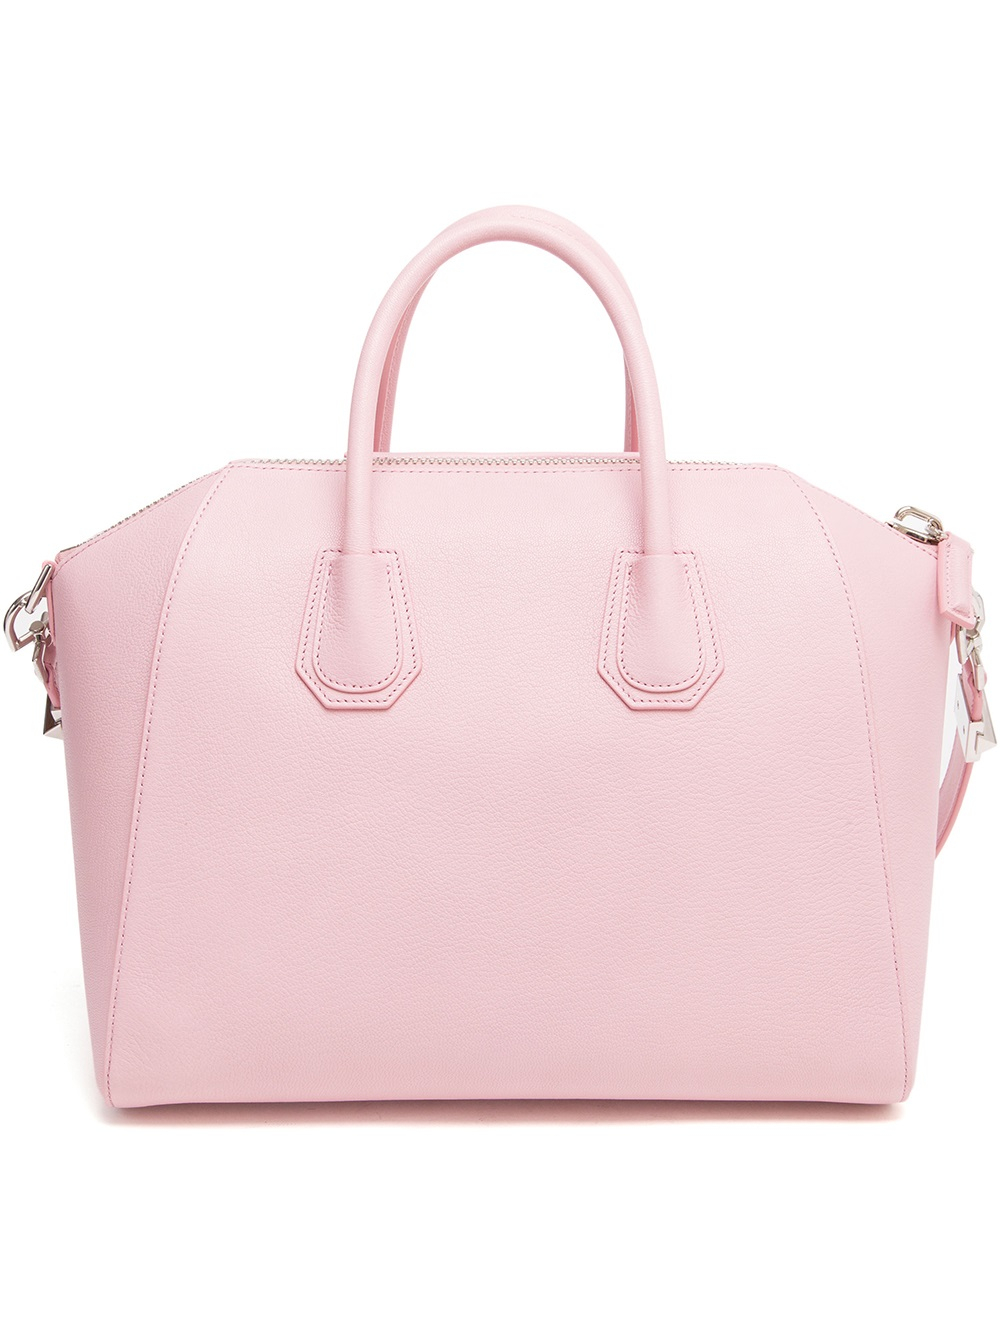 Givenchy Antigona Grained Leather Tote Bag in Pink & Purple (Pink) - Lyst